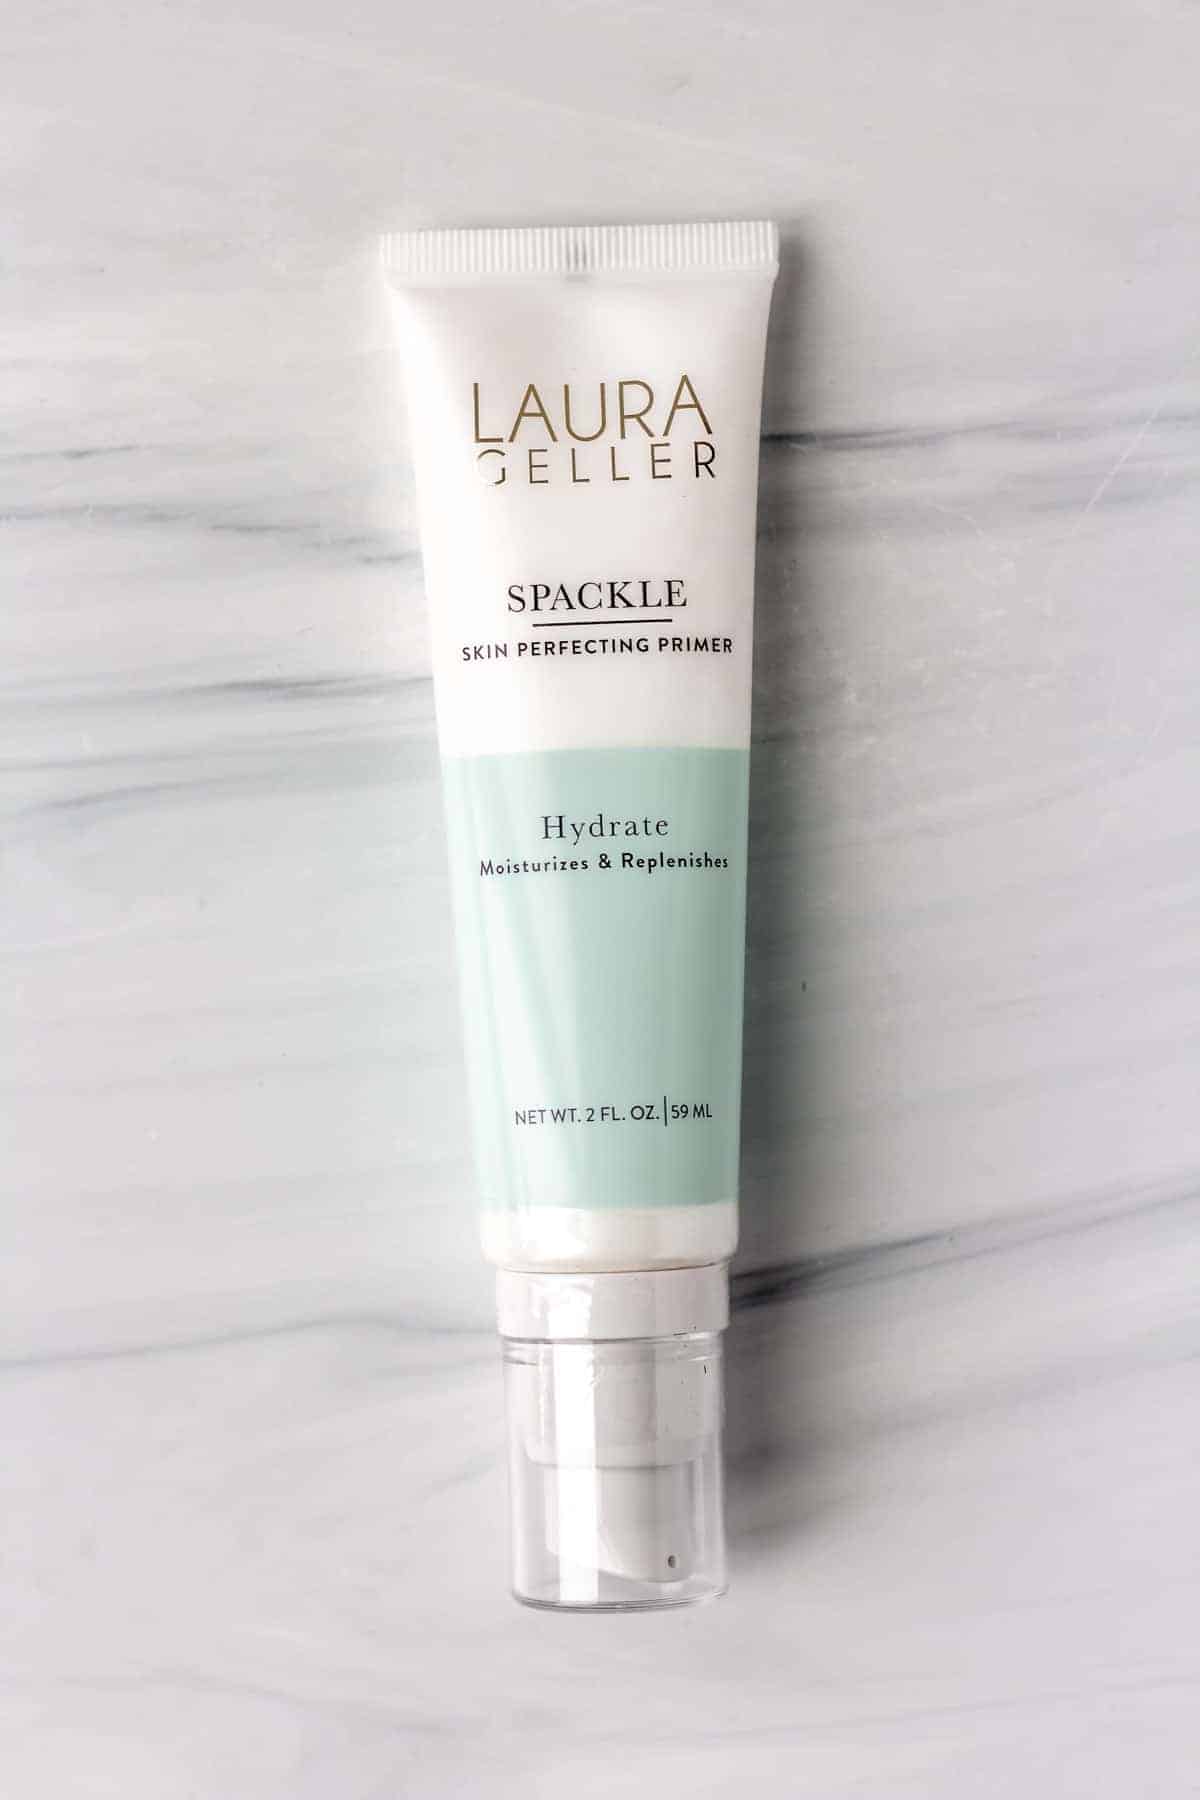 Laura Geller Spackle Skin Perfecting Primer: Hydrate tube on a gray background.